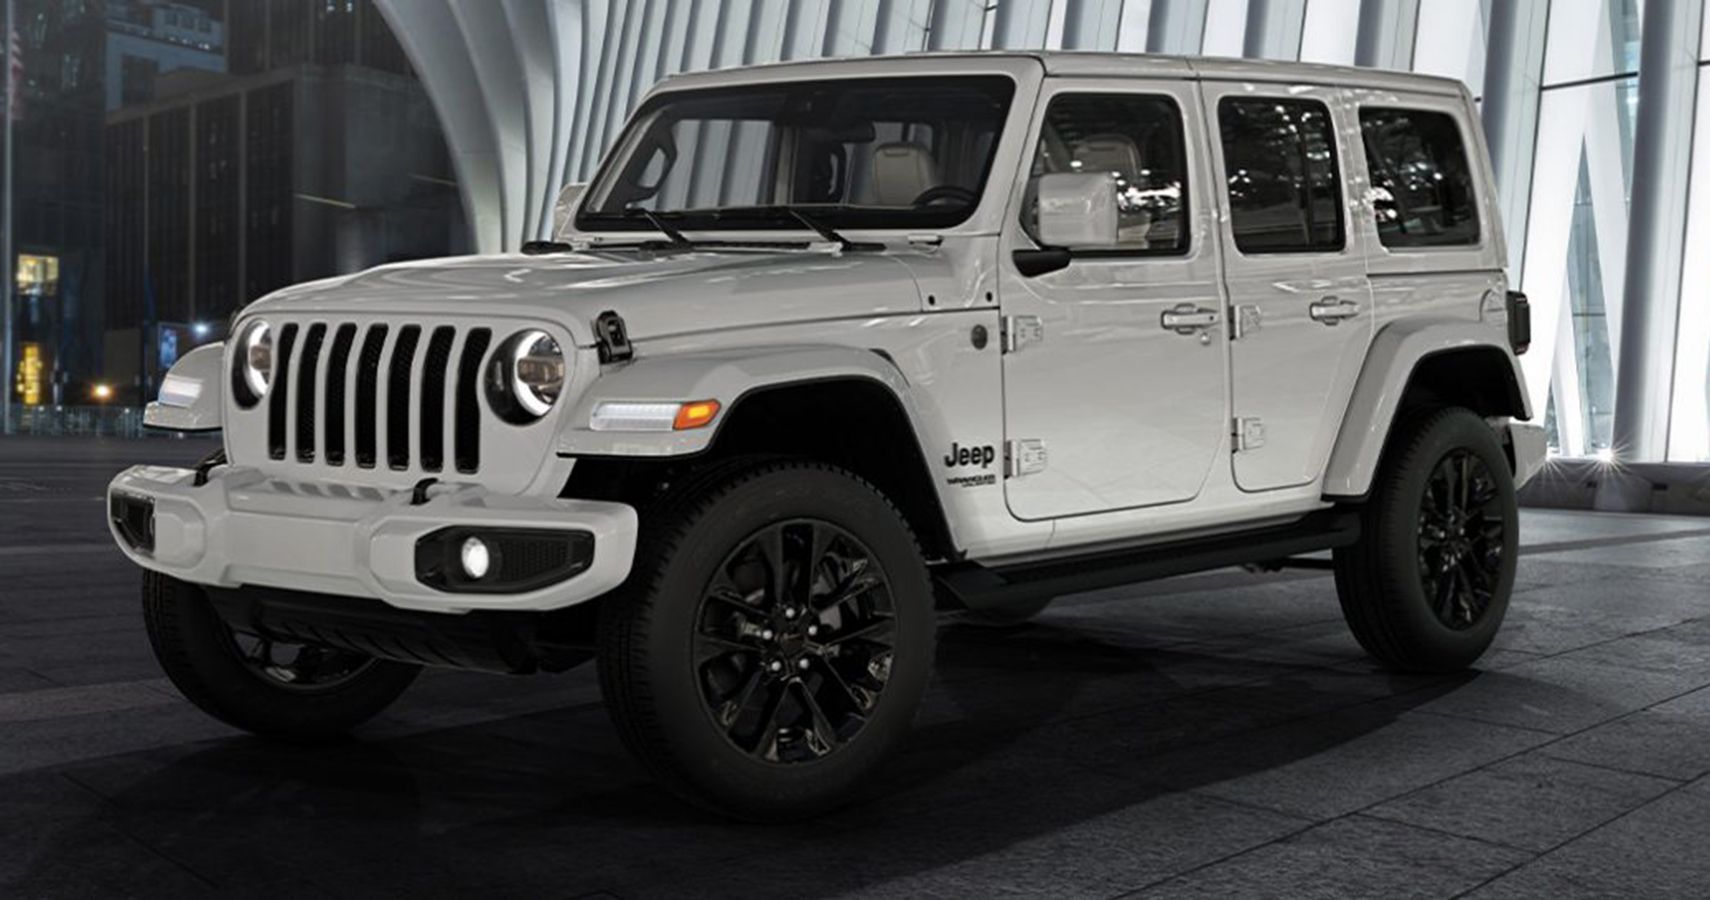 New Details Emerge On 2021 Jeep Wrangler High Altitude Edition